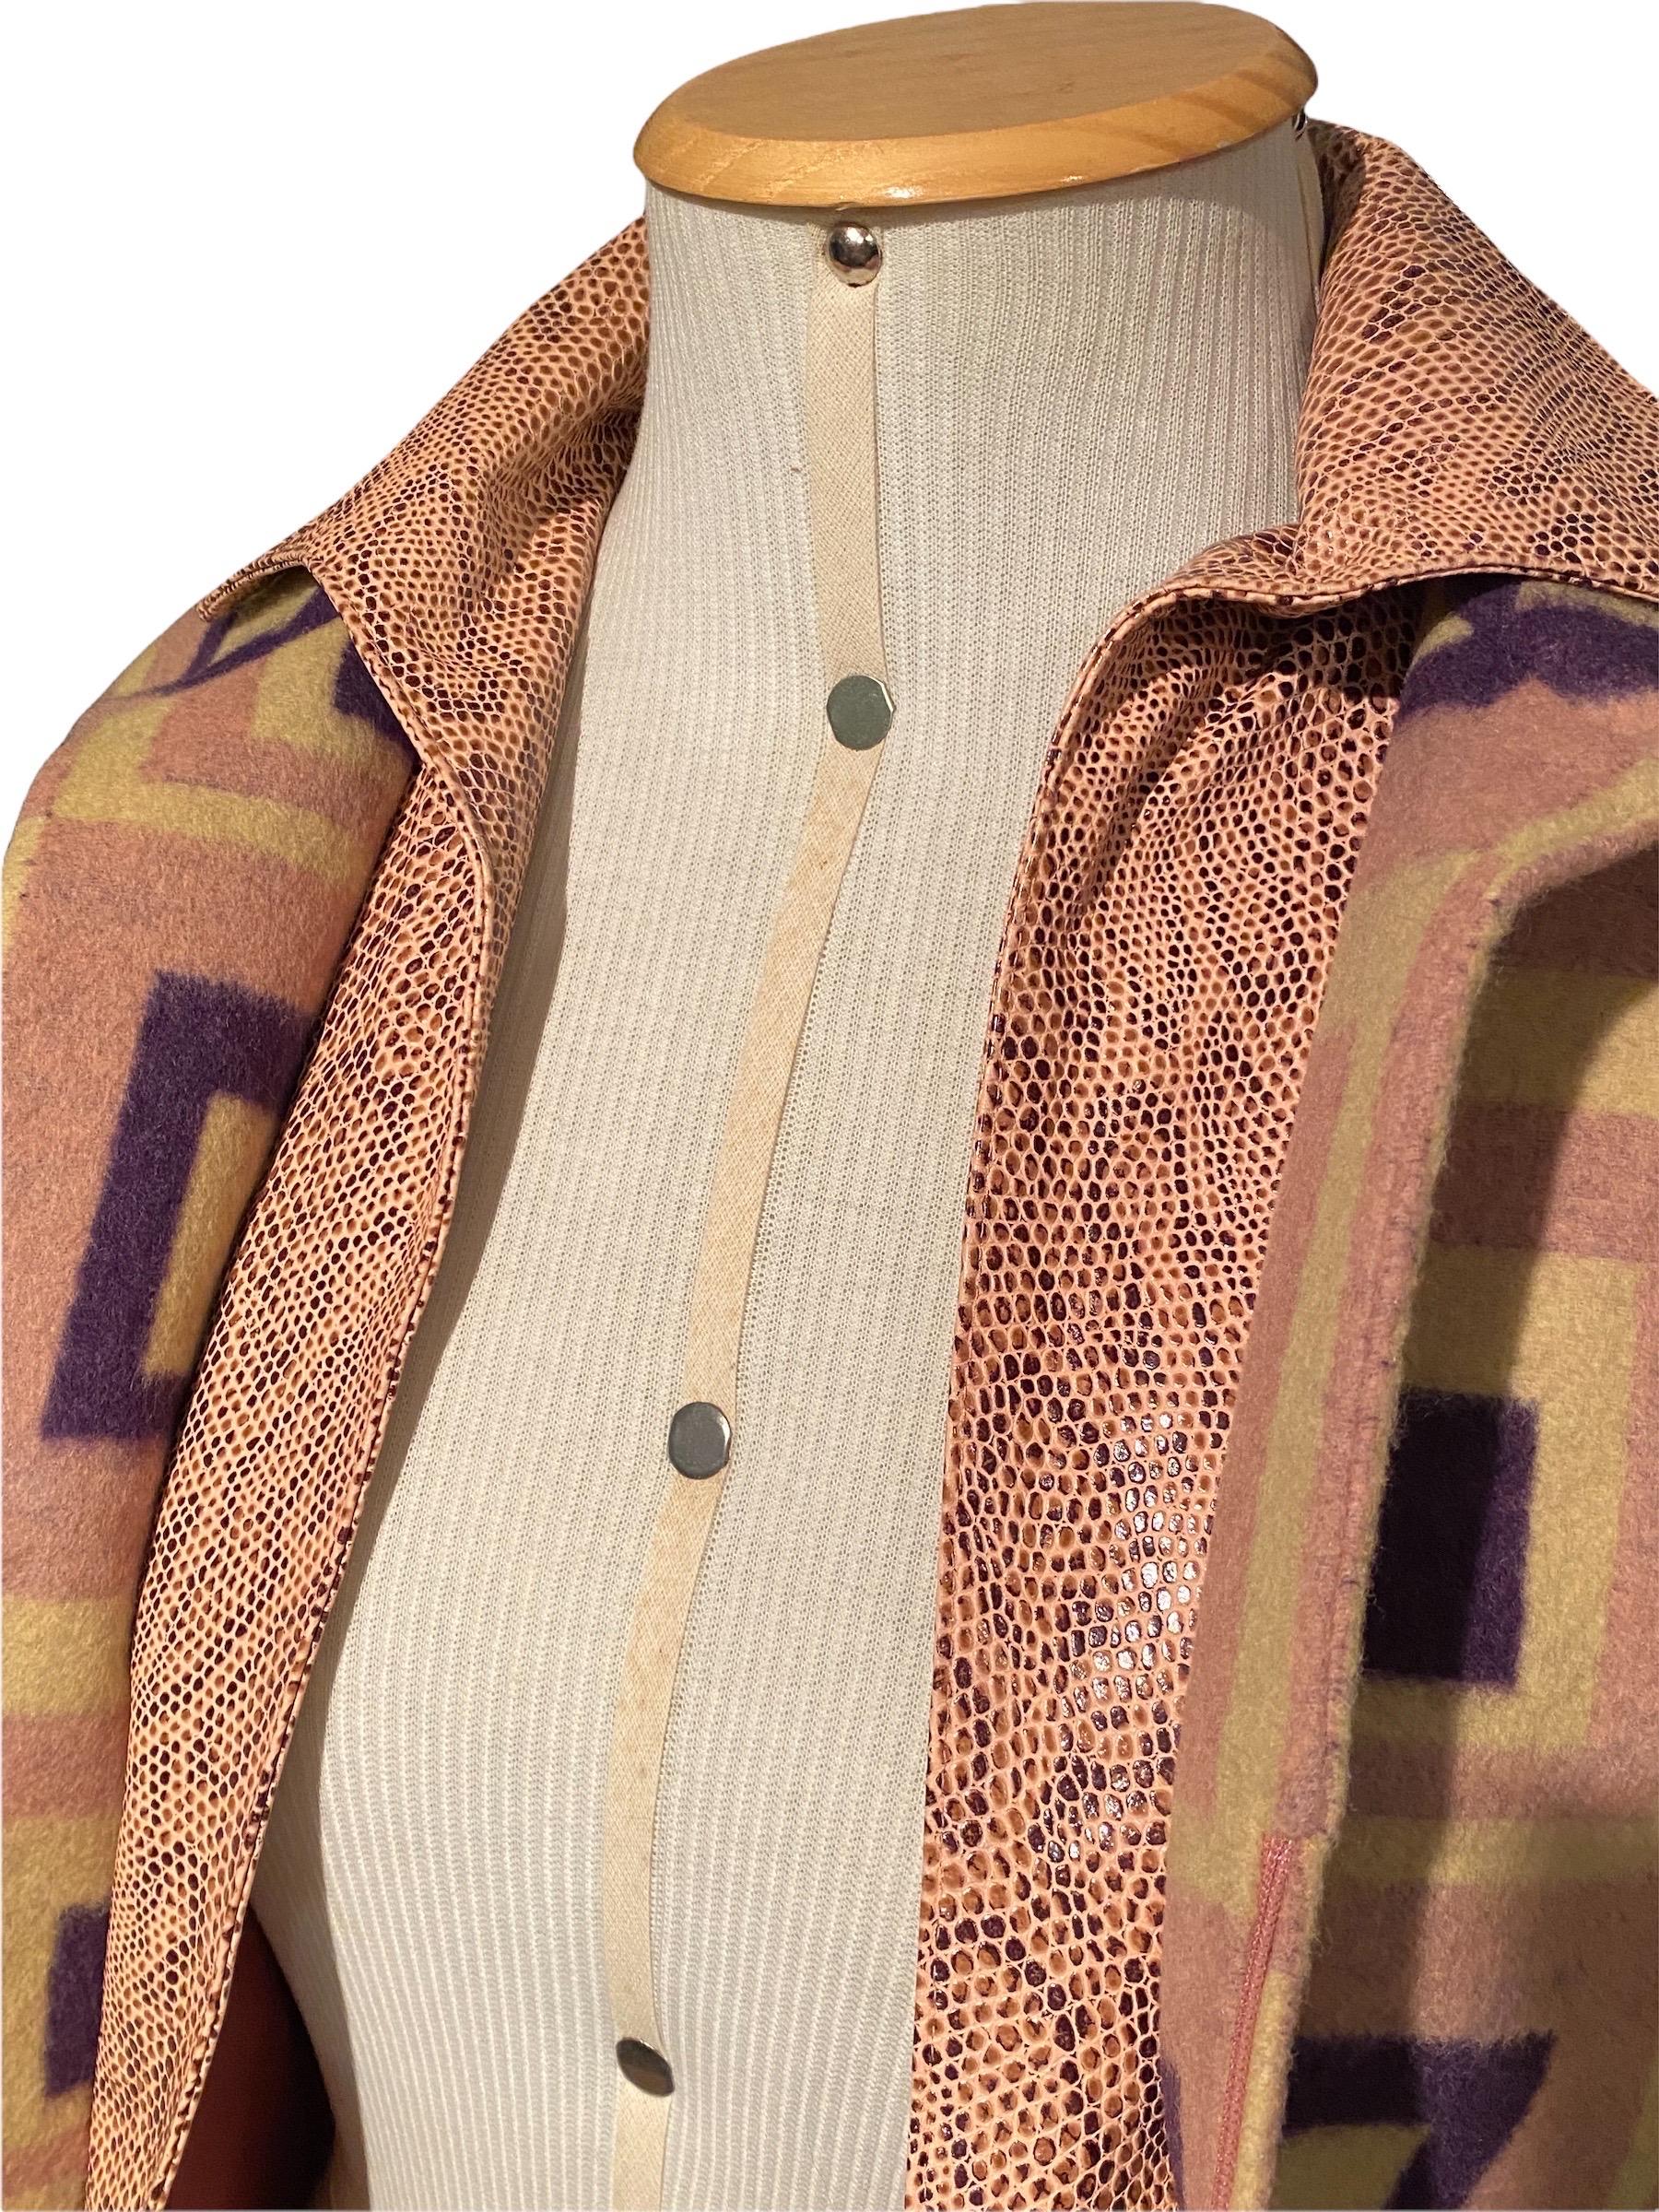 FW 2000 runway snakeskin-trim wool jacket. Worn by one and only Amber Valletta in the Ad Campaign. 

Double collar
Geometric pattern - yellow and purple on pink 
Gold Versace Medusa hardware
Zip-Up front
Two front pockets
Silk lining

Pre-owned